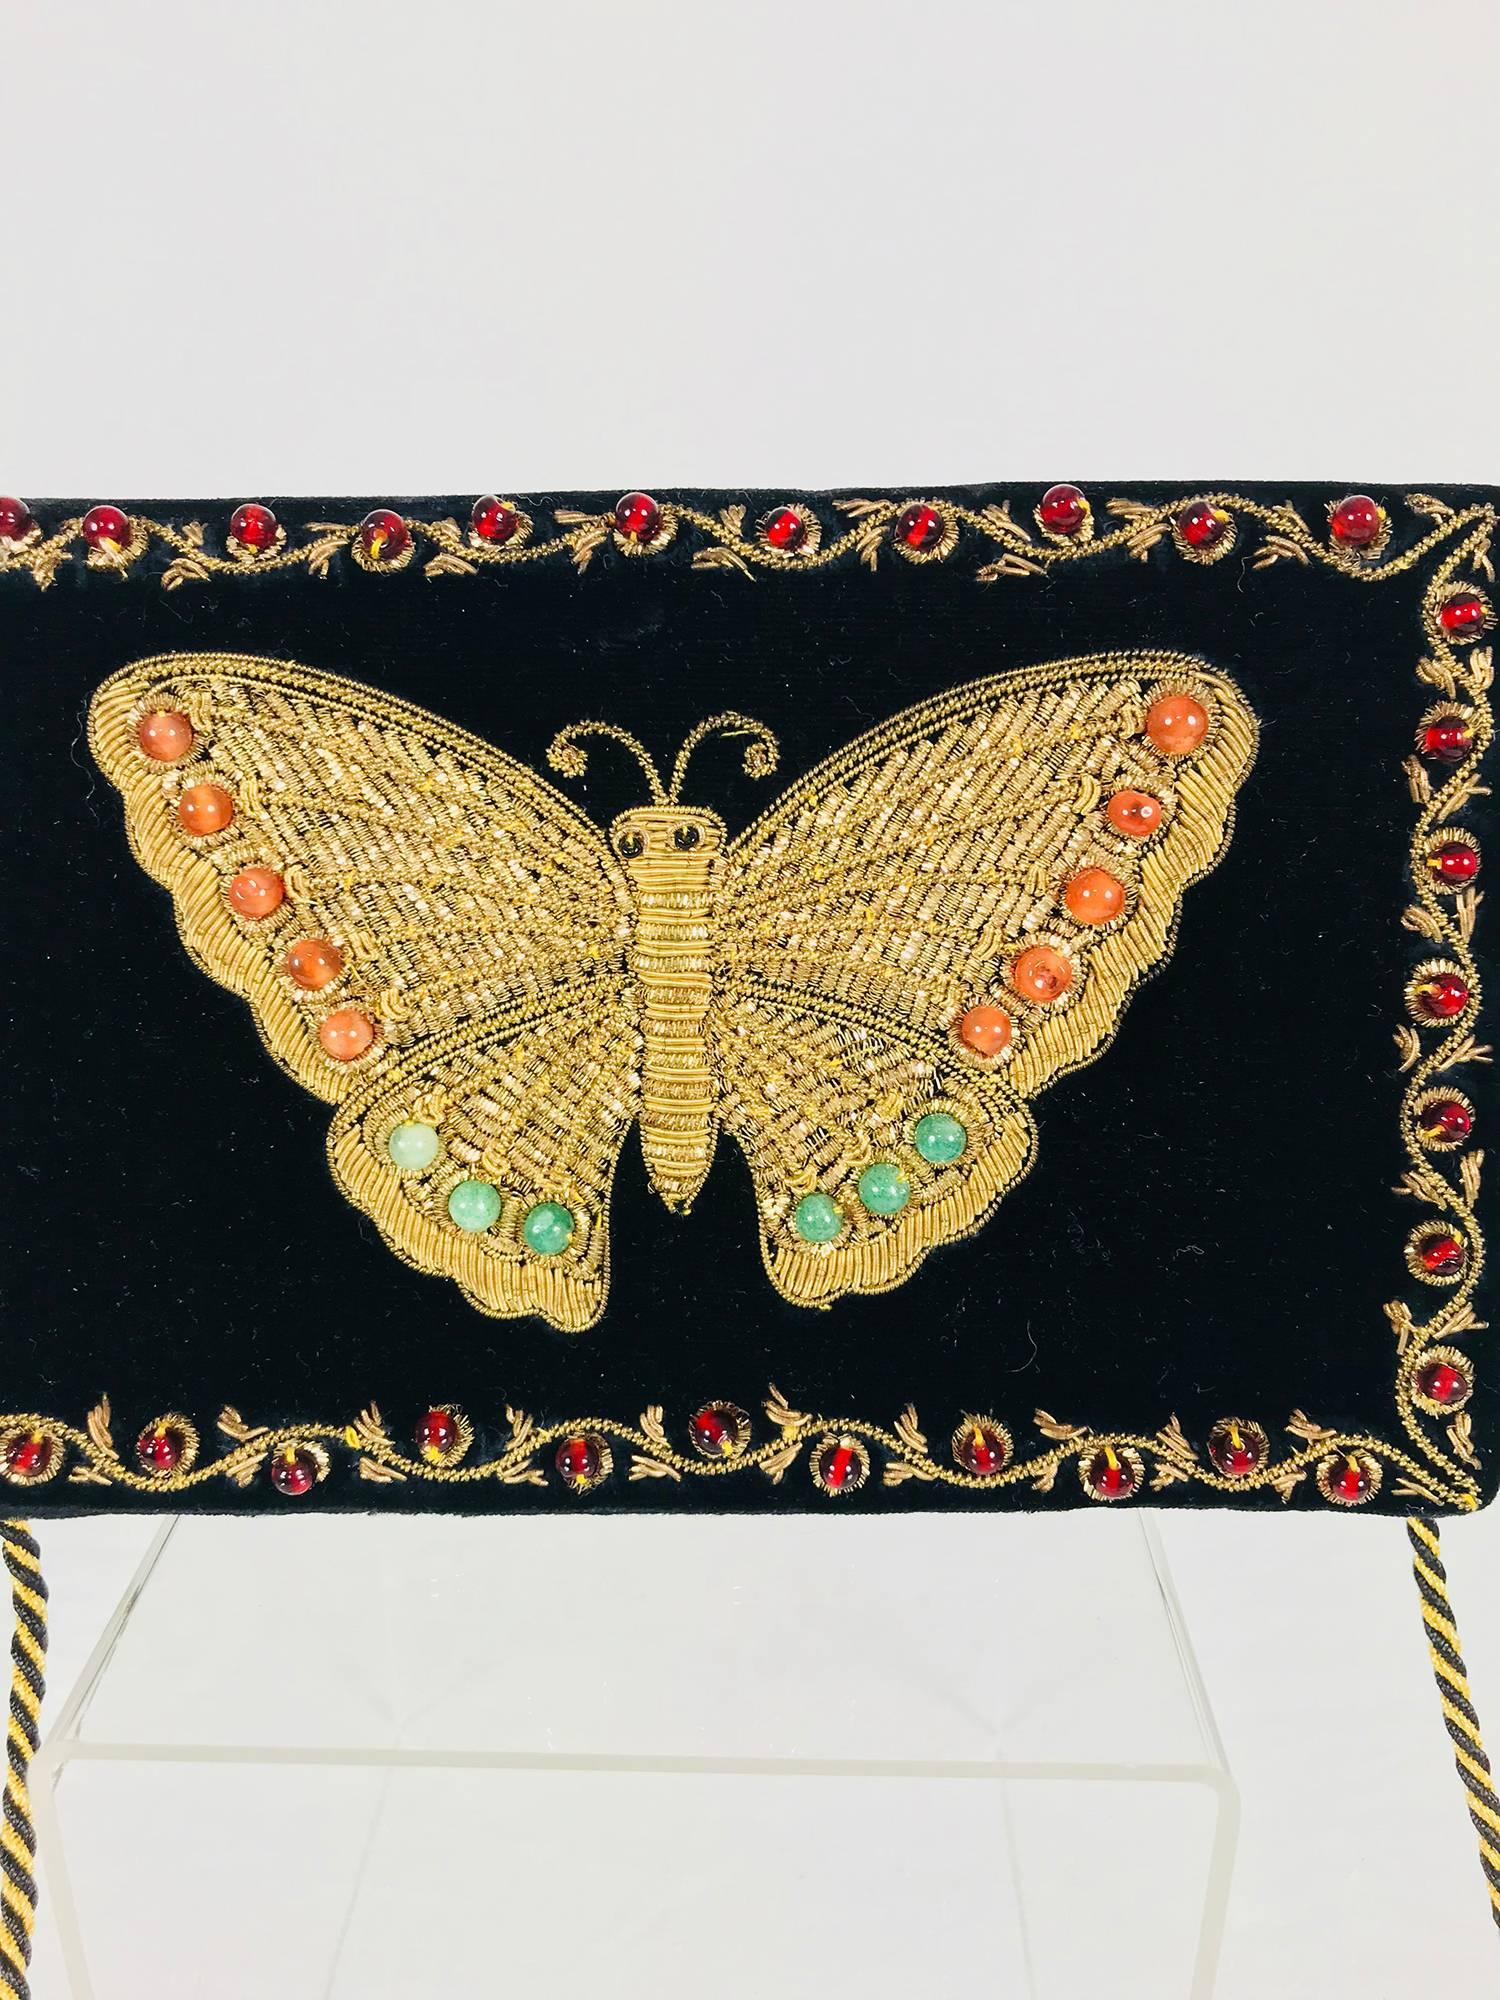 Jewel bead gold bouillon black velvet embroidered butterfly evening bag from the 1970s. Unique shoulder bag similar to bags done in India for Yves Saint Laurent in the 1970s. This bag is in excellent condition. Black velvet is heavily embroidered at